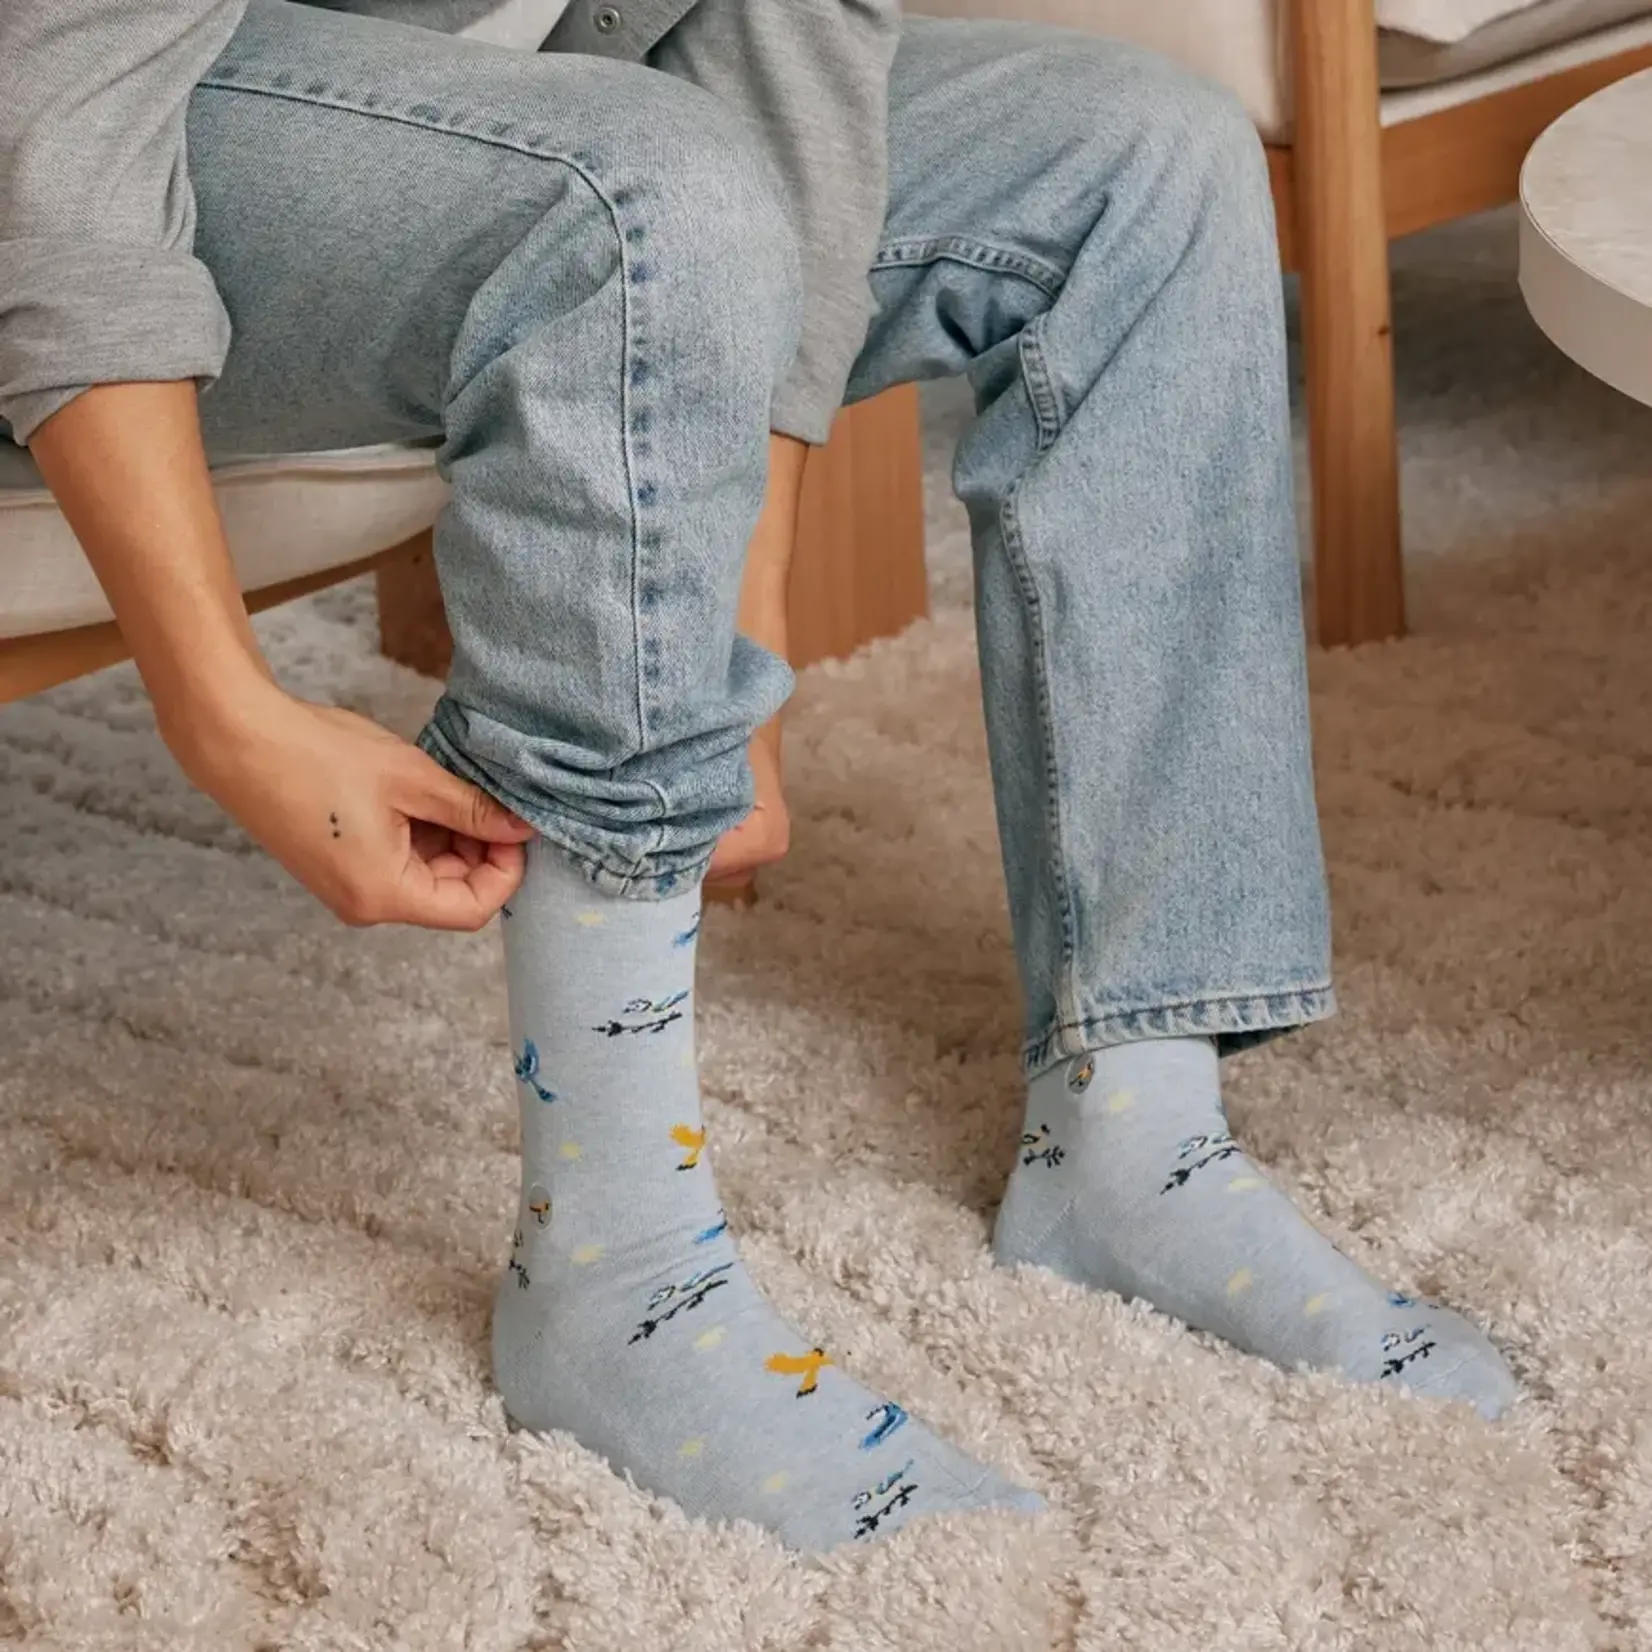 Socks that Protect Songbirds | Small